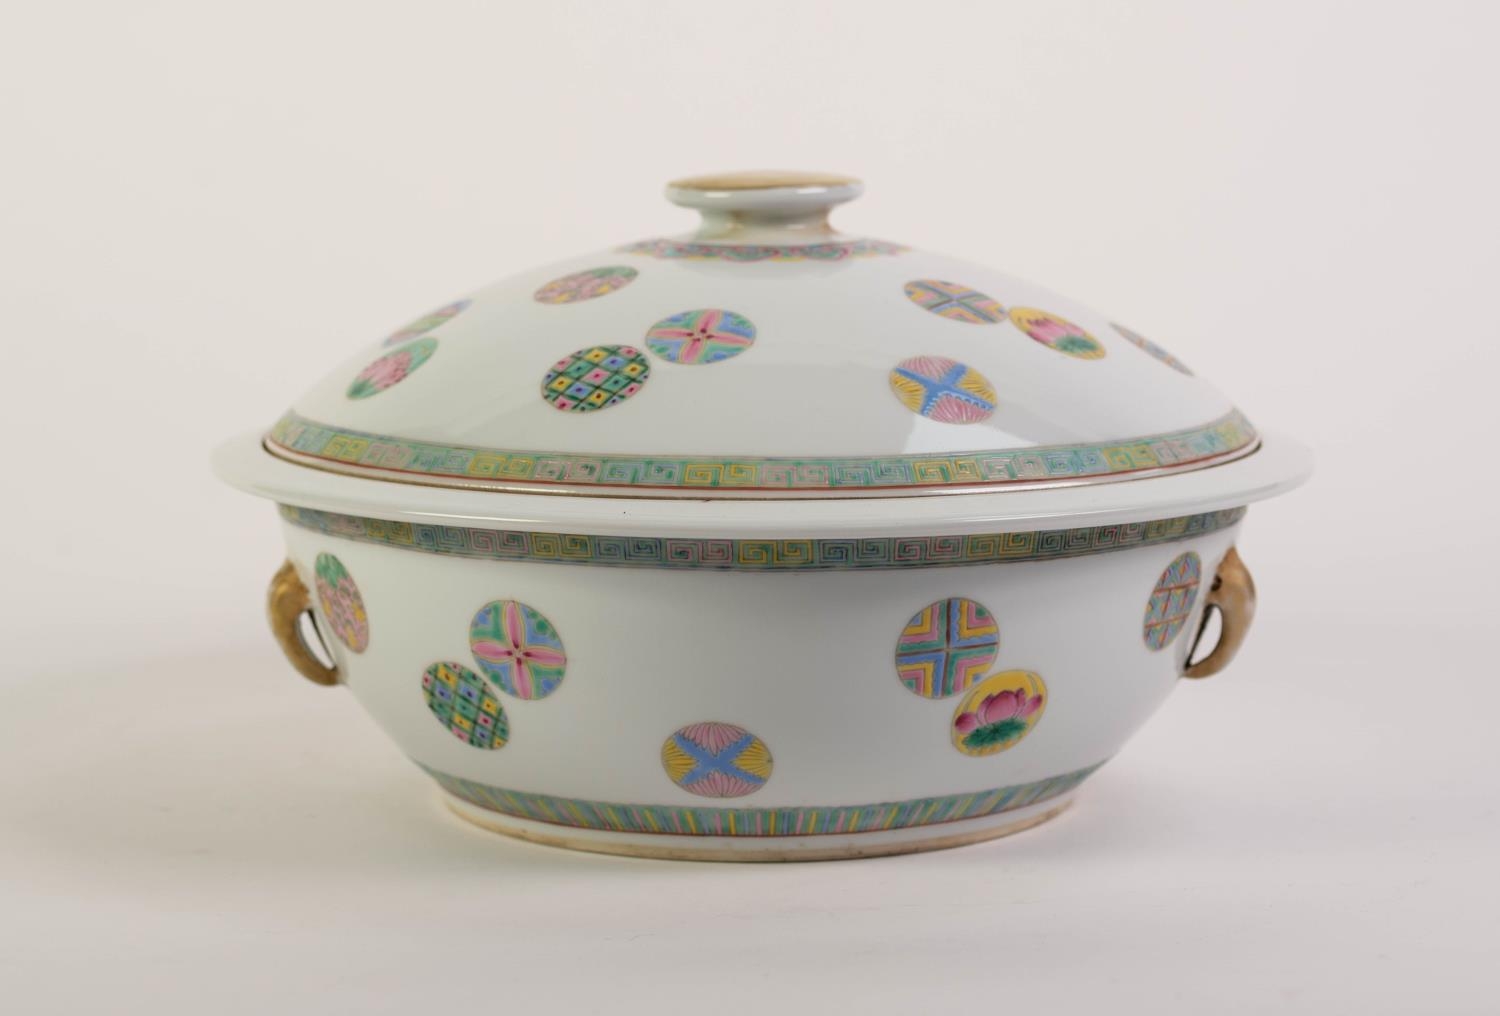 MODERN CHINESE ENAMELLED PORCELAIN SERVING DISH AND COVER, of typical form with small, gilt elephant